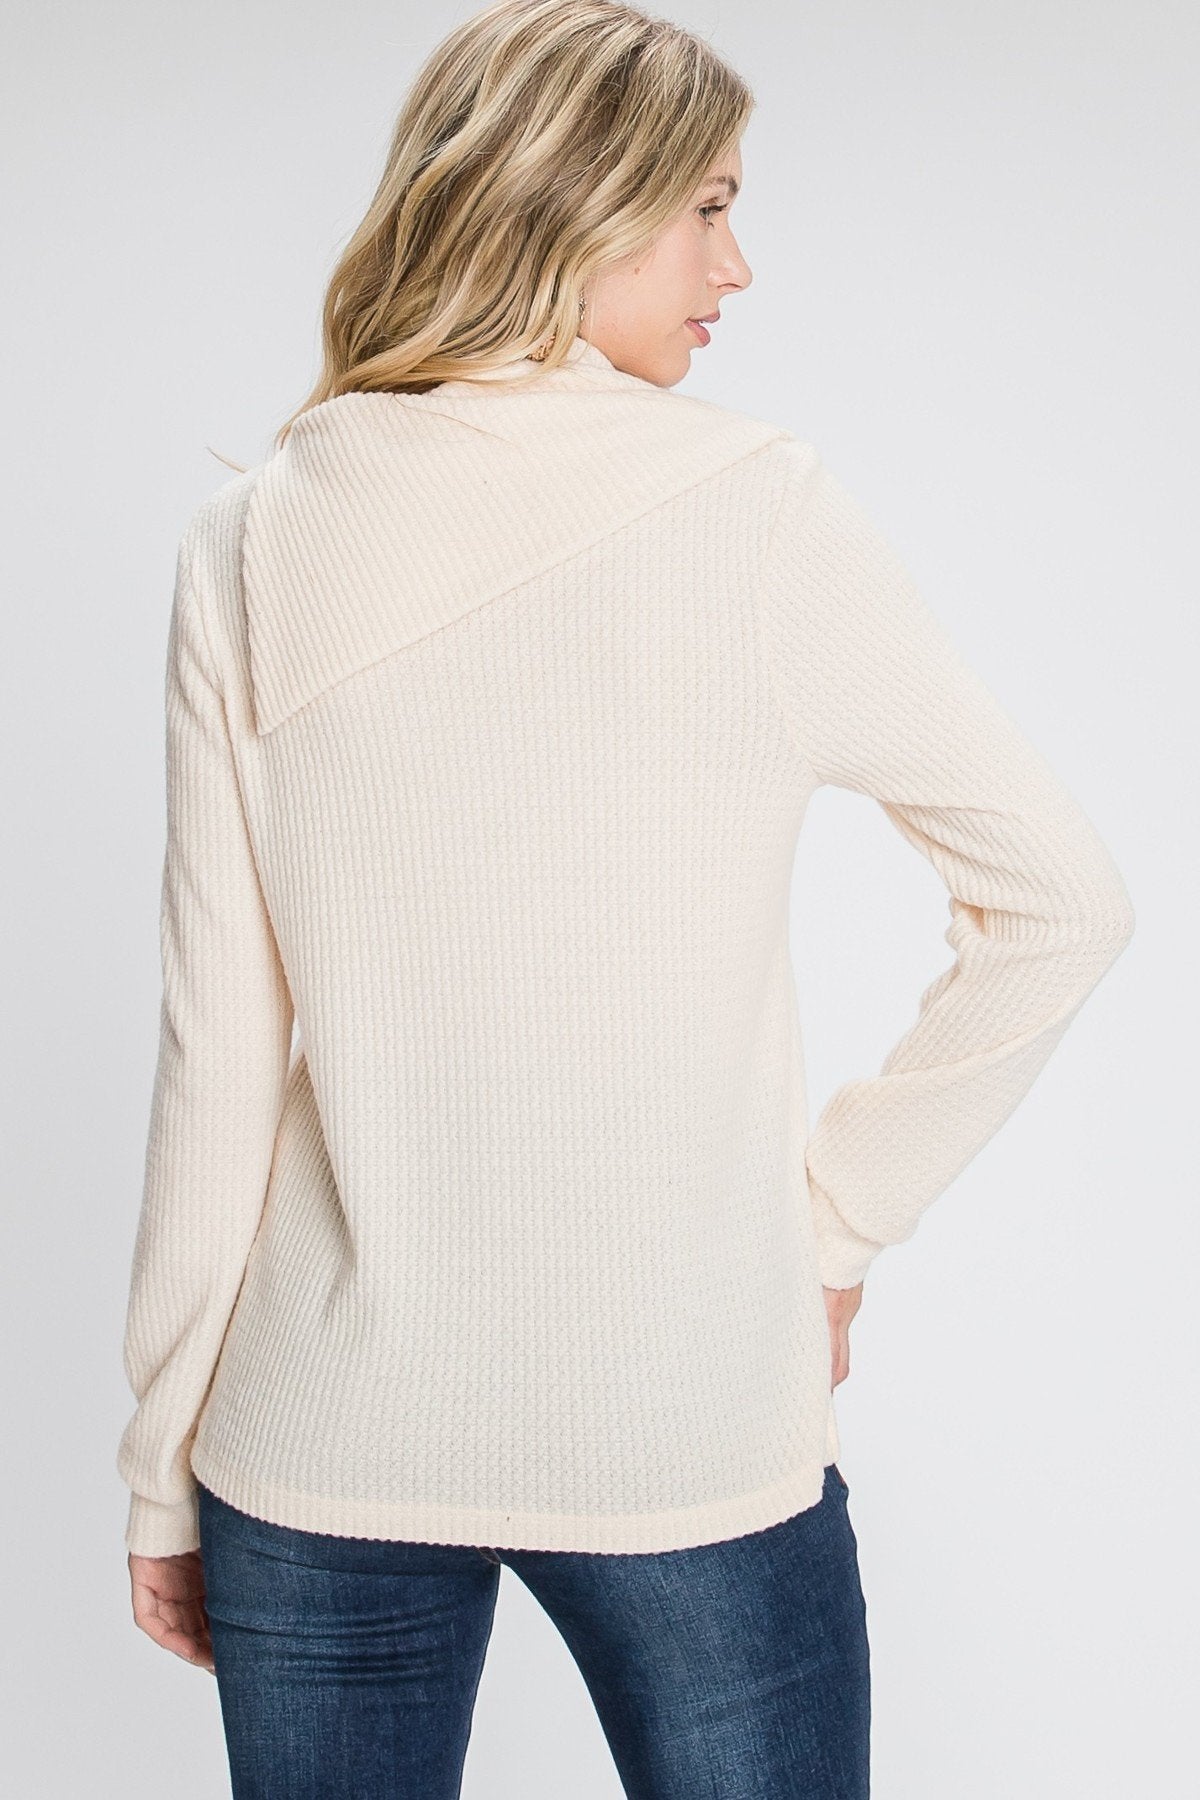 Buttoned Flap Mock Sweater Sunny EvE Fashion